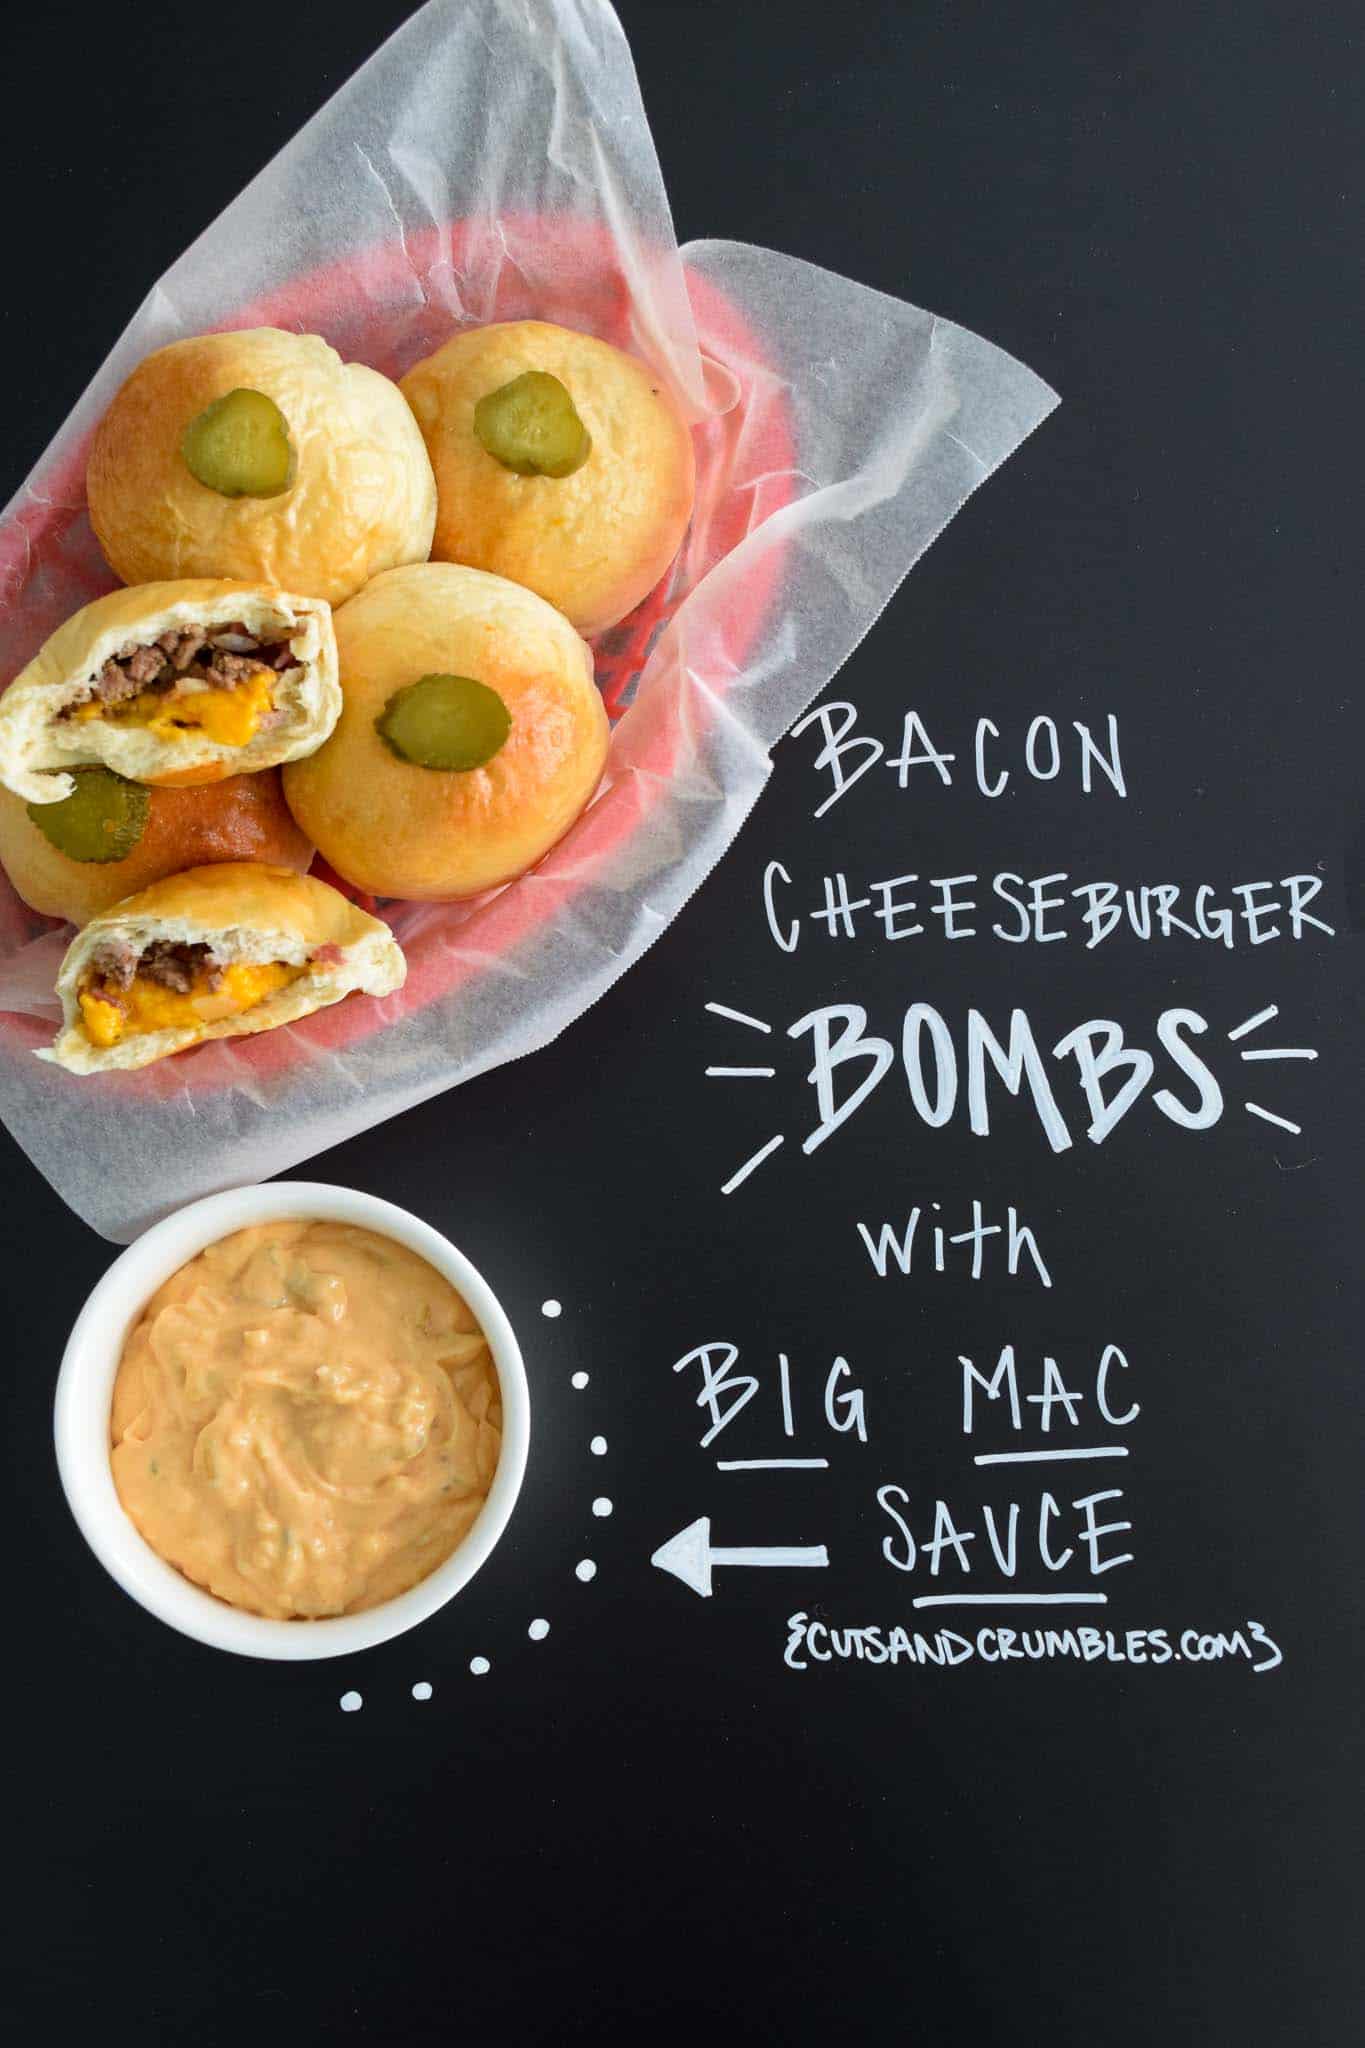 Bacon Cheeseburger Bombs with Big Mac Sauce with title written on chalkboard